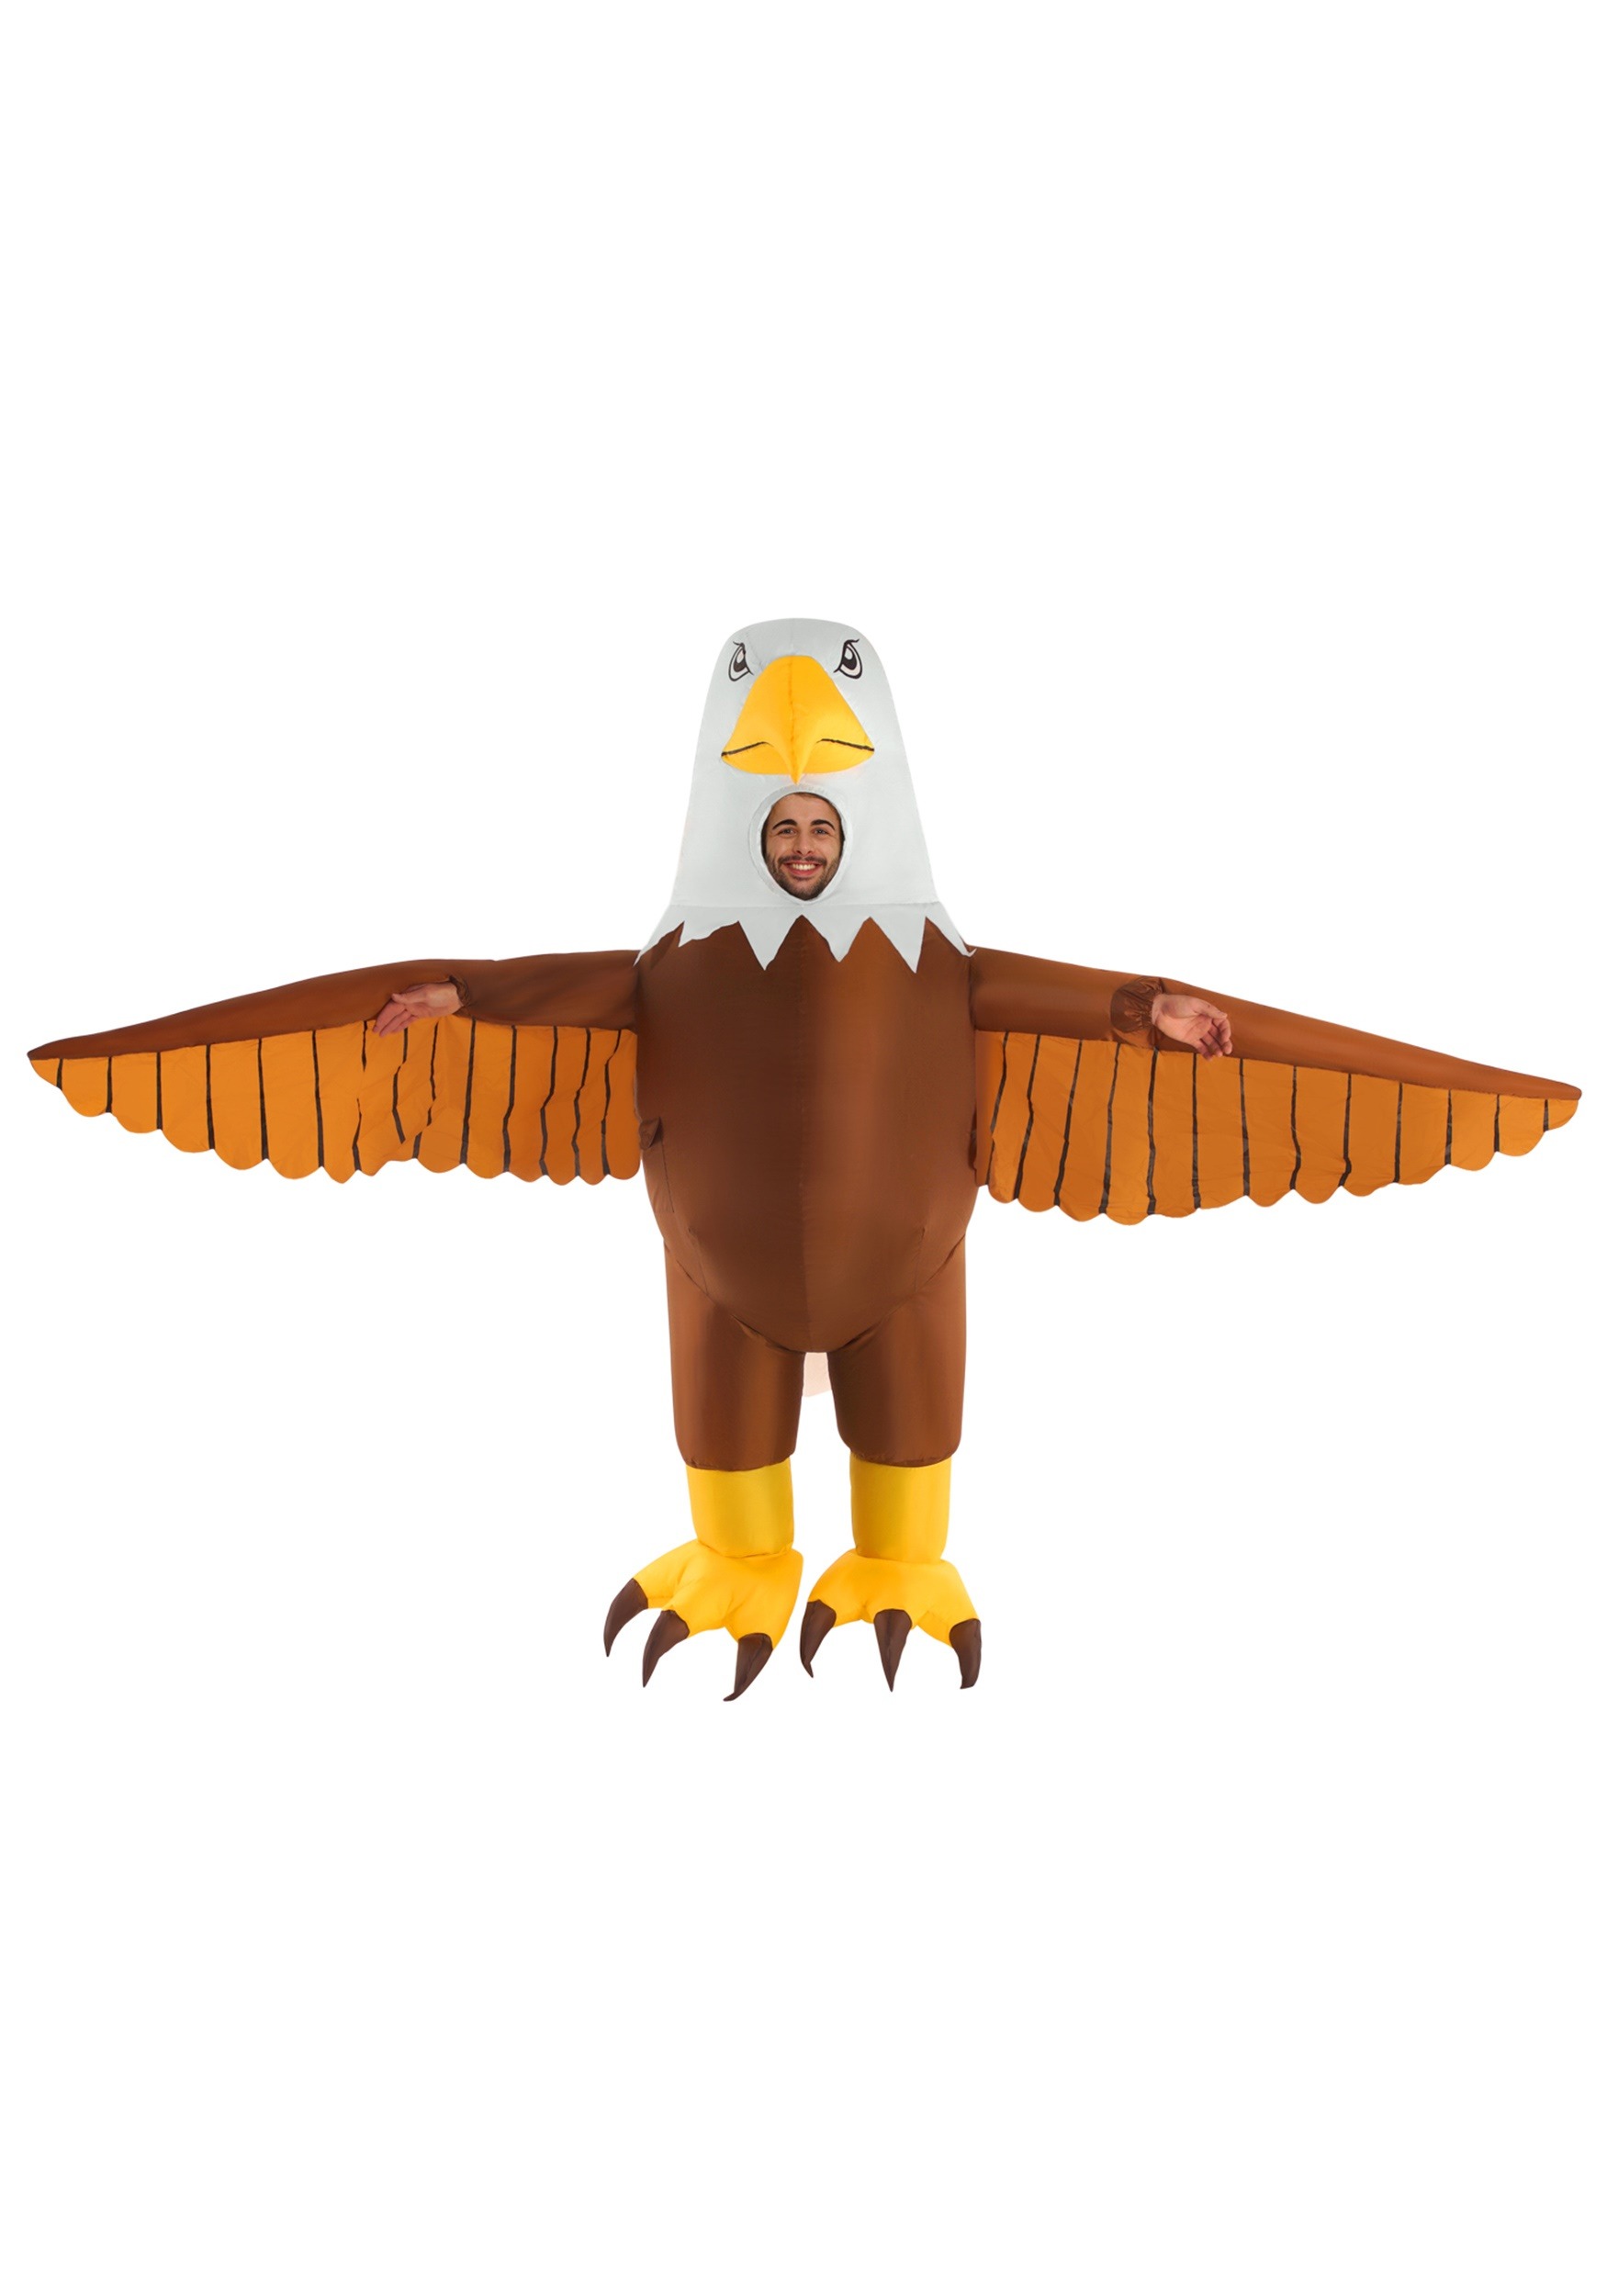 https://images.halloweencostumes.ca/products/46714/1-1/adult-giant-inflatable-eagle-costume.jpg